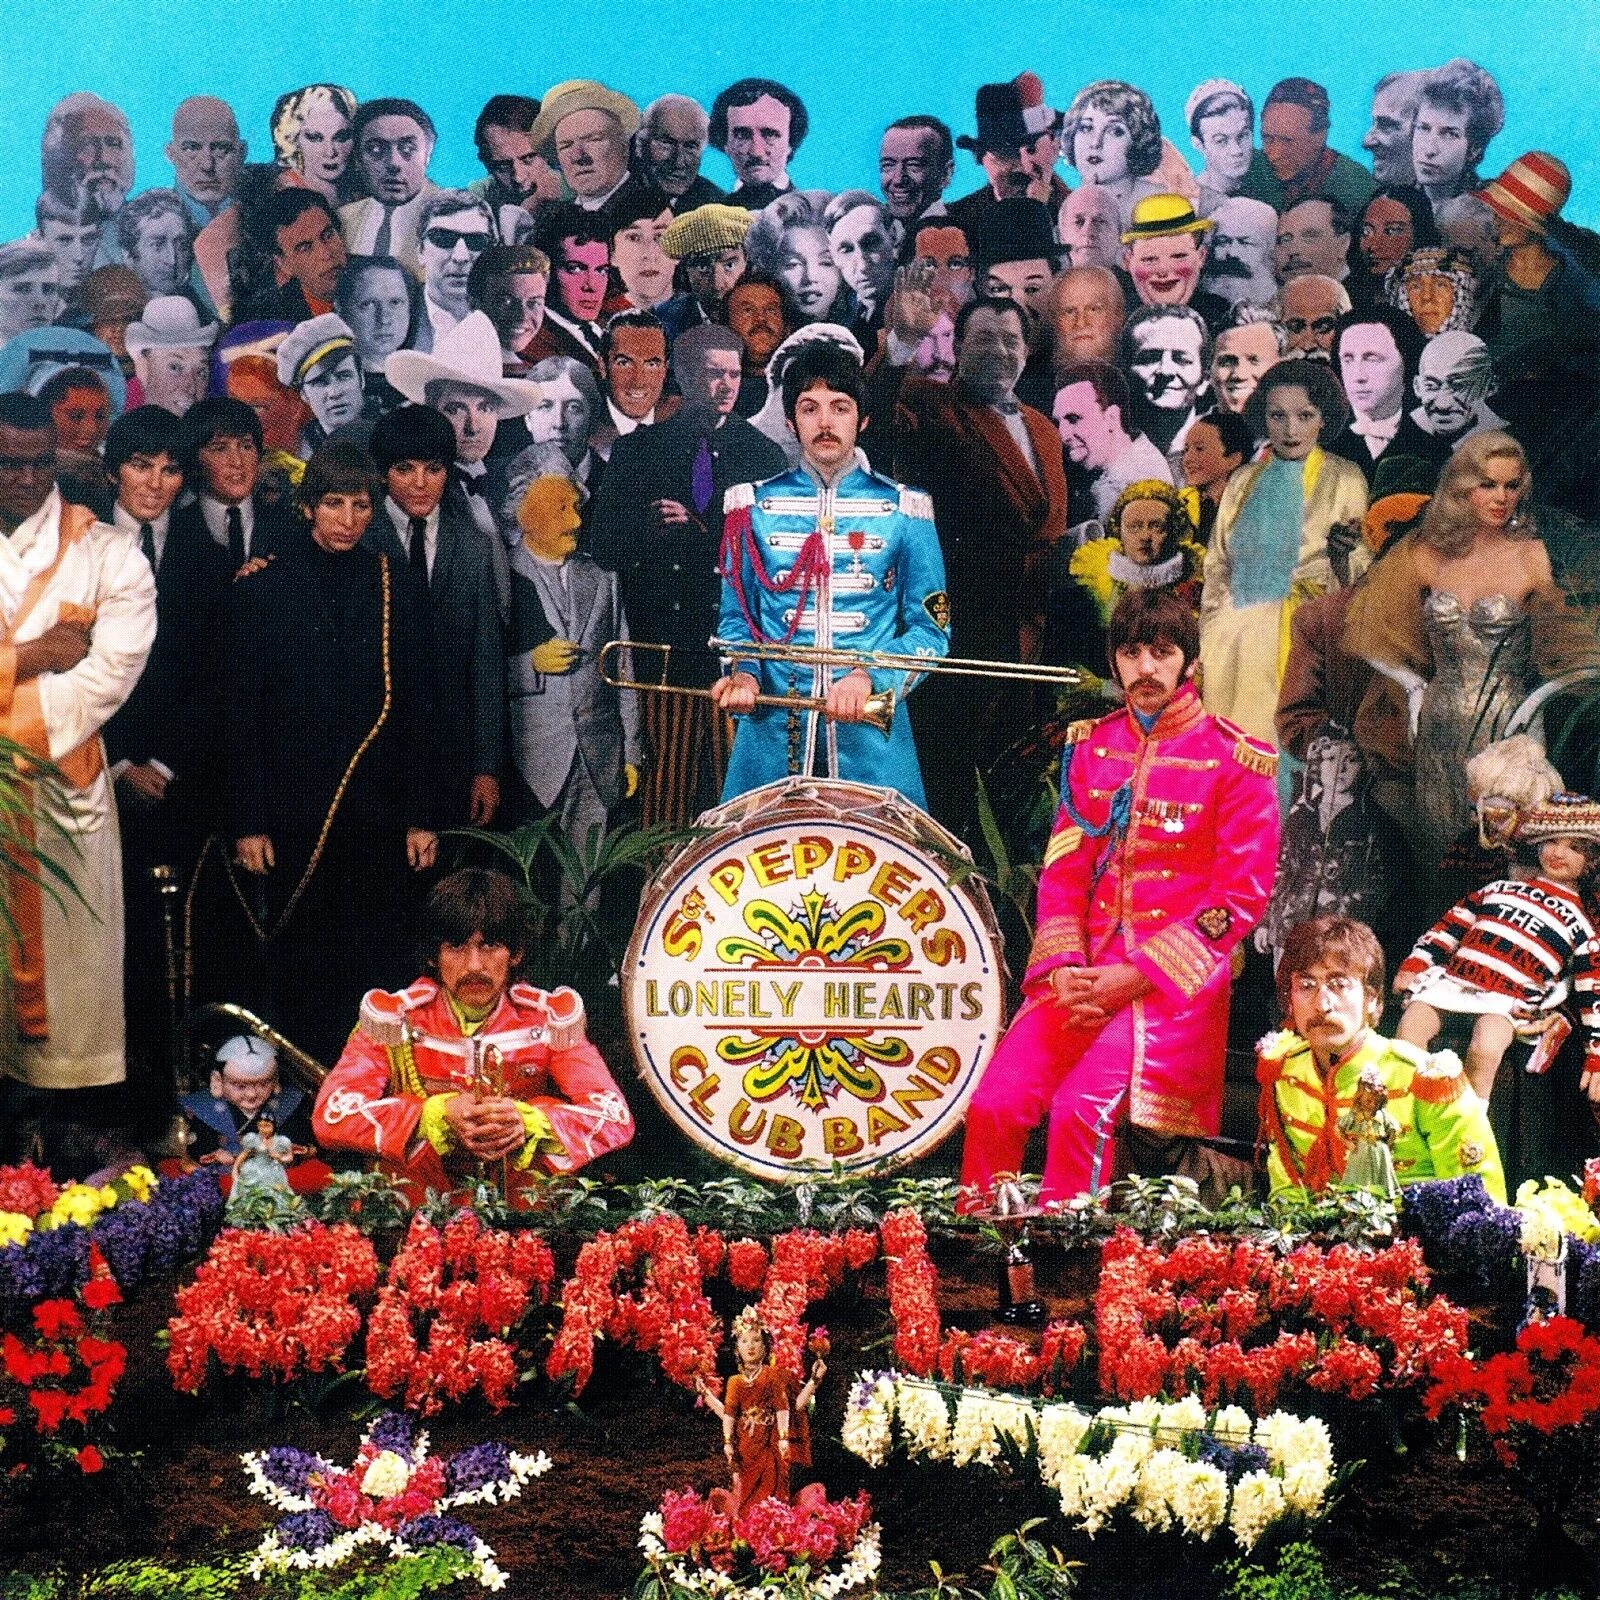 Beatles sgt pepper lonely. The Beatles Sgt. Pepper`s Lonely Hearts Club Band 1967. The Beatles сержант Пеппер. Sgt. Pepper’s Lonely Hearts Club Band the Beatles. Sgt Pepper's Lonely Hearts Club Band.